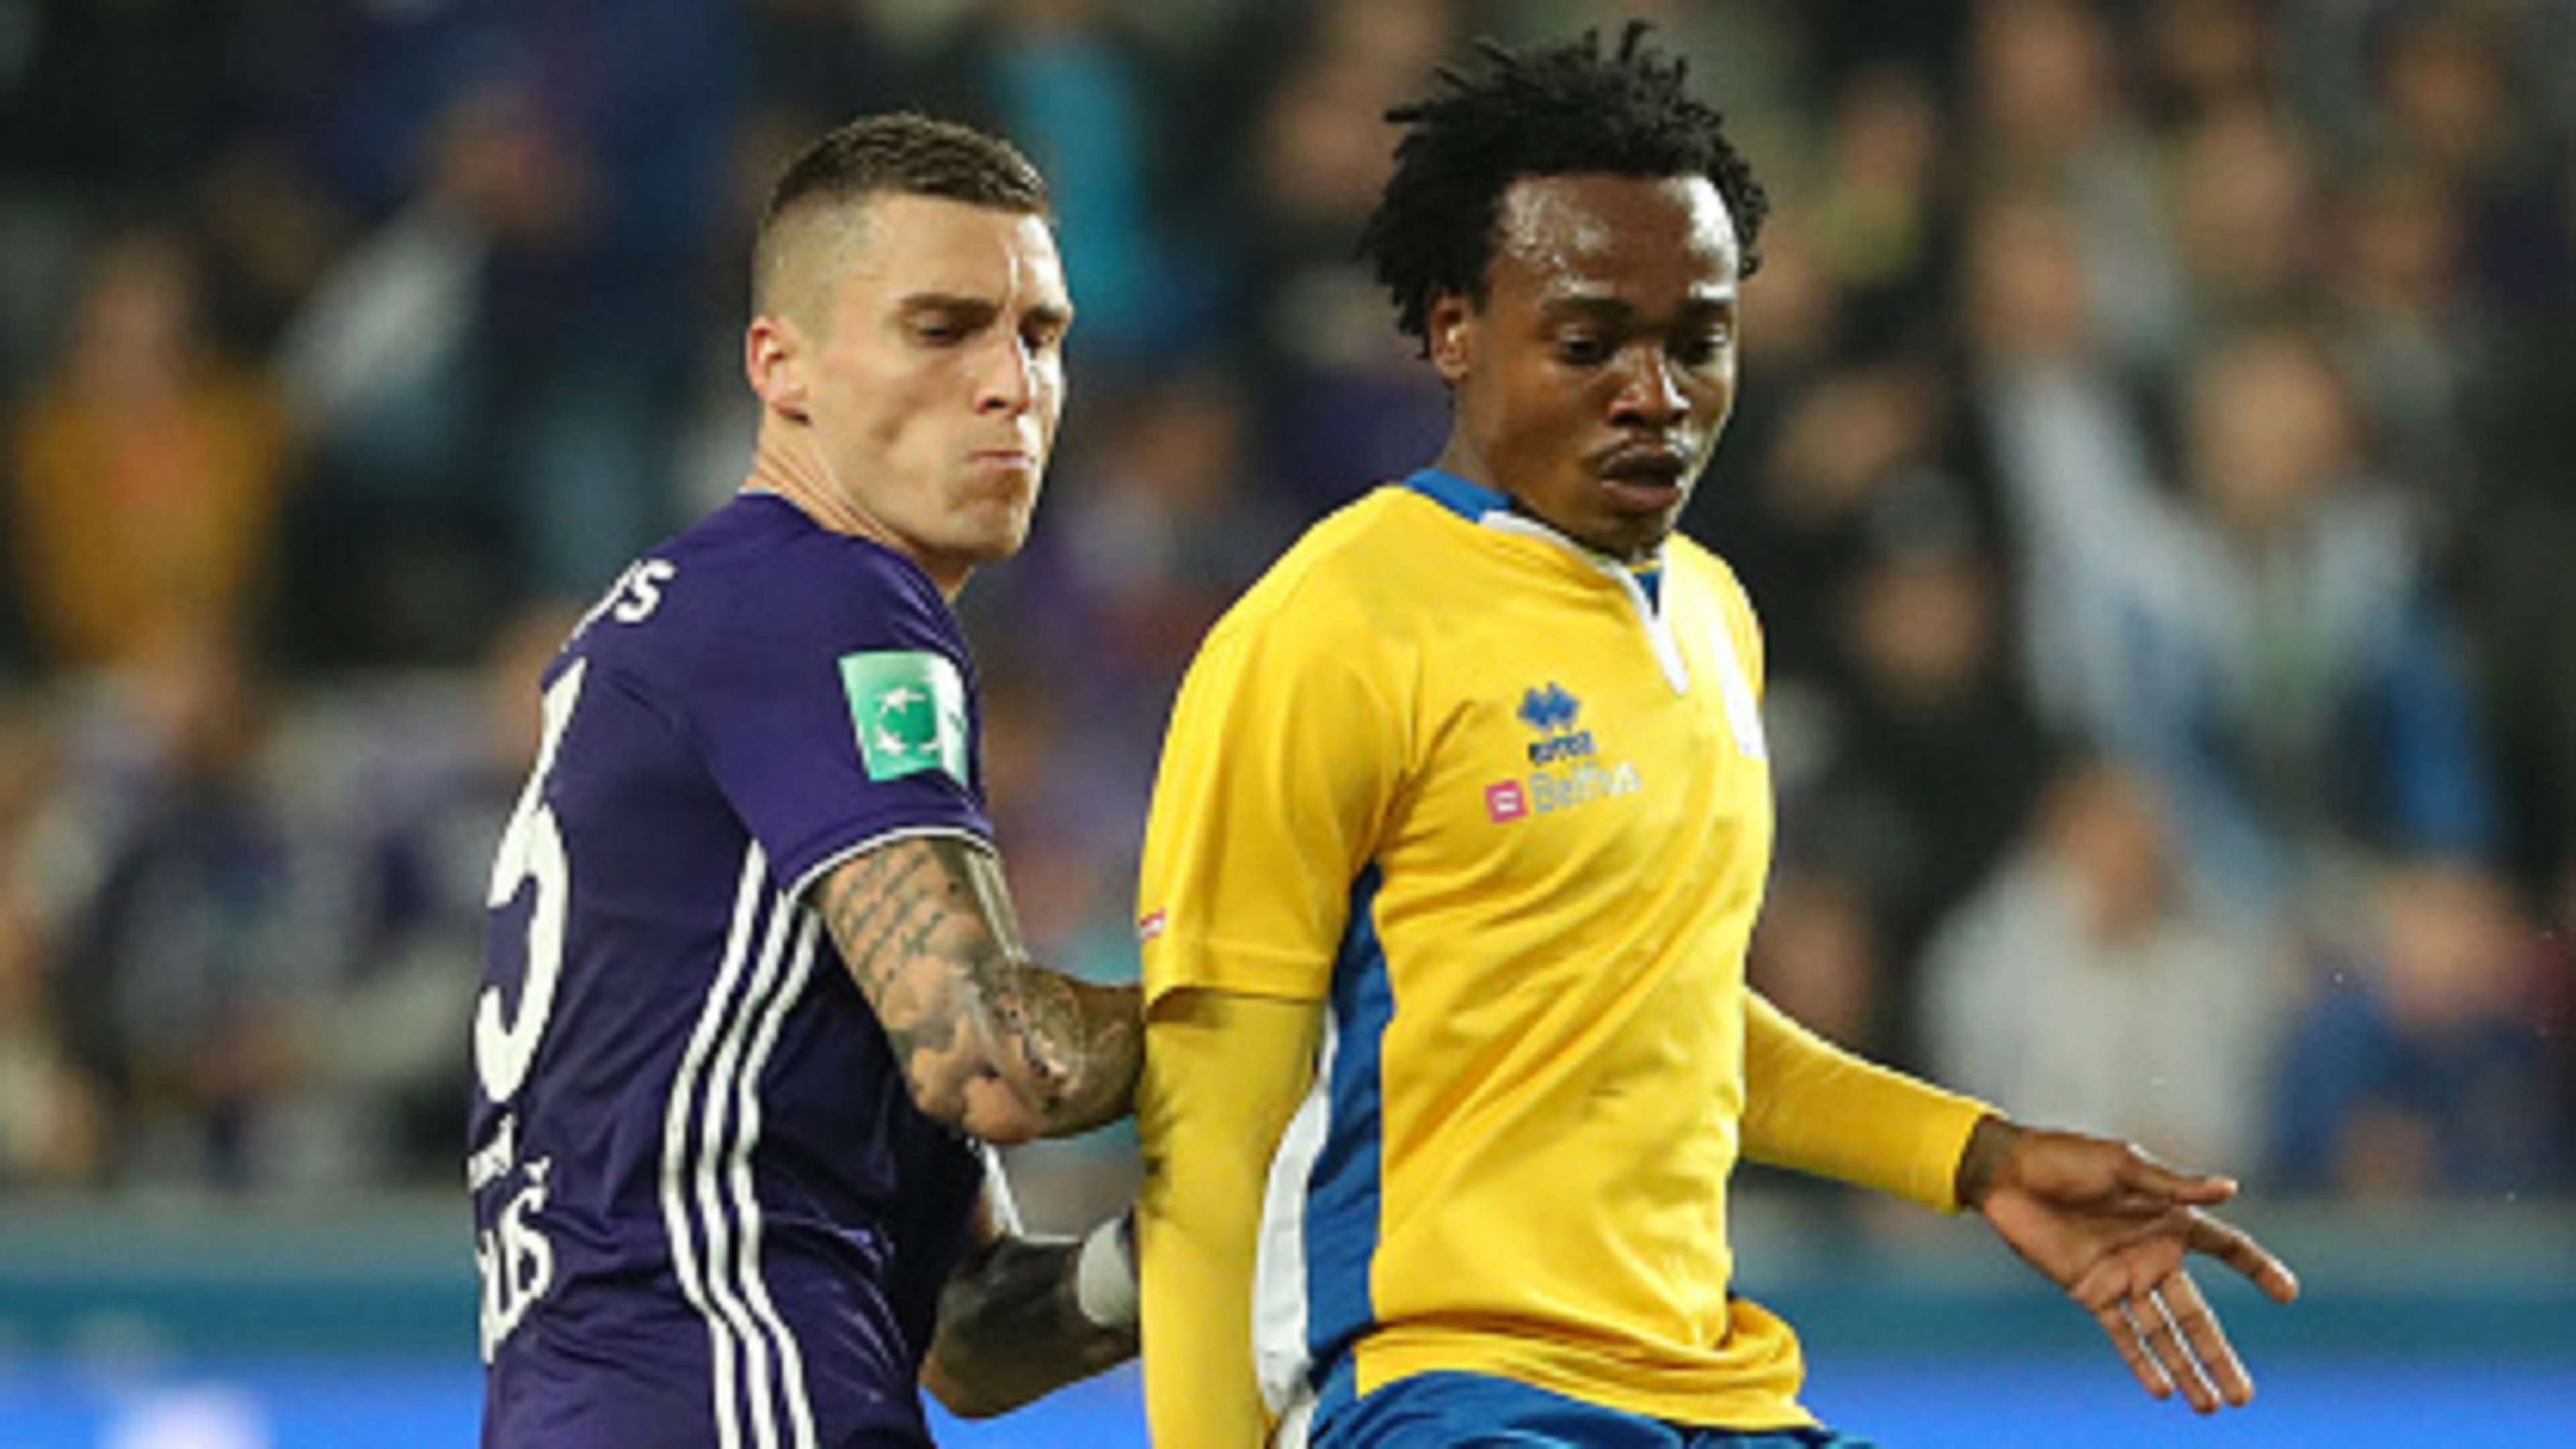 Percy Tau and Ognjen Vranjes fight for the ball during the Croky Cup match between Rsc Anderlecht and Union Saint-Gilloise at Constant Vanden Stock Stadium on September 27, 2018